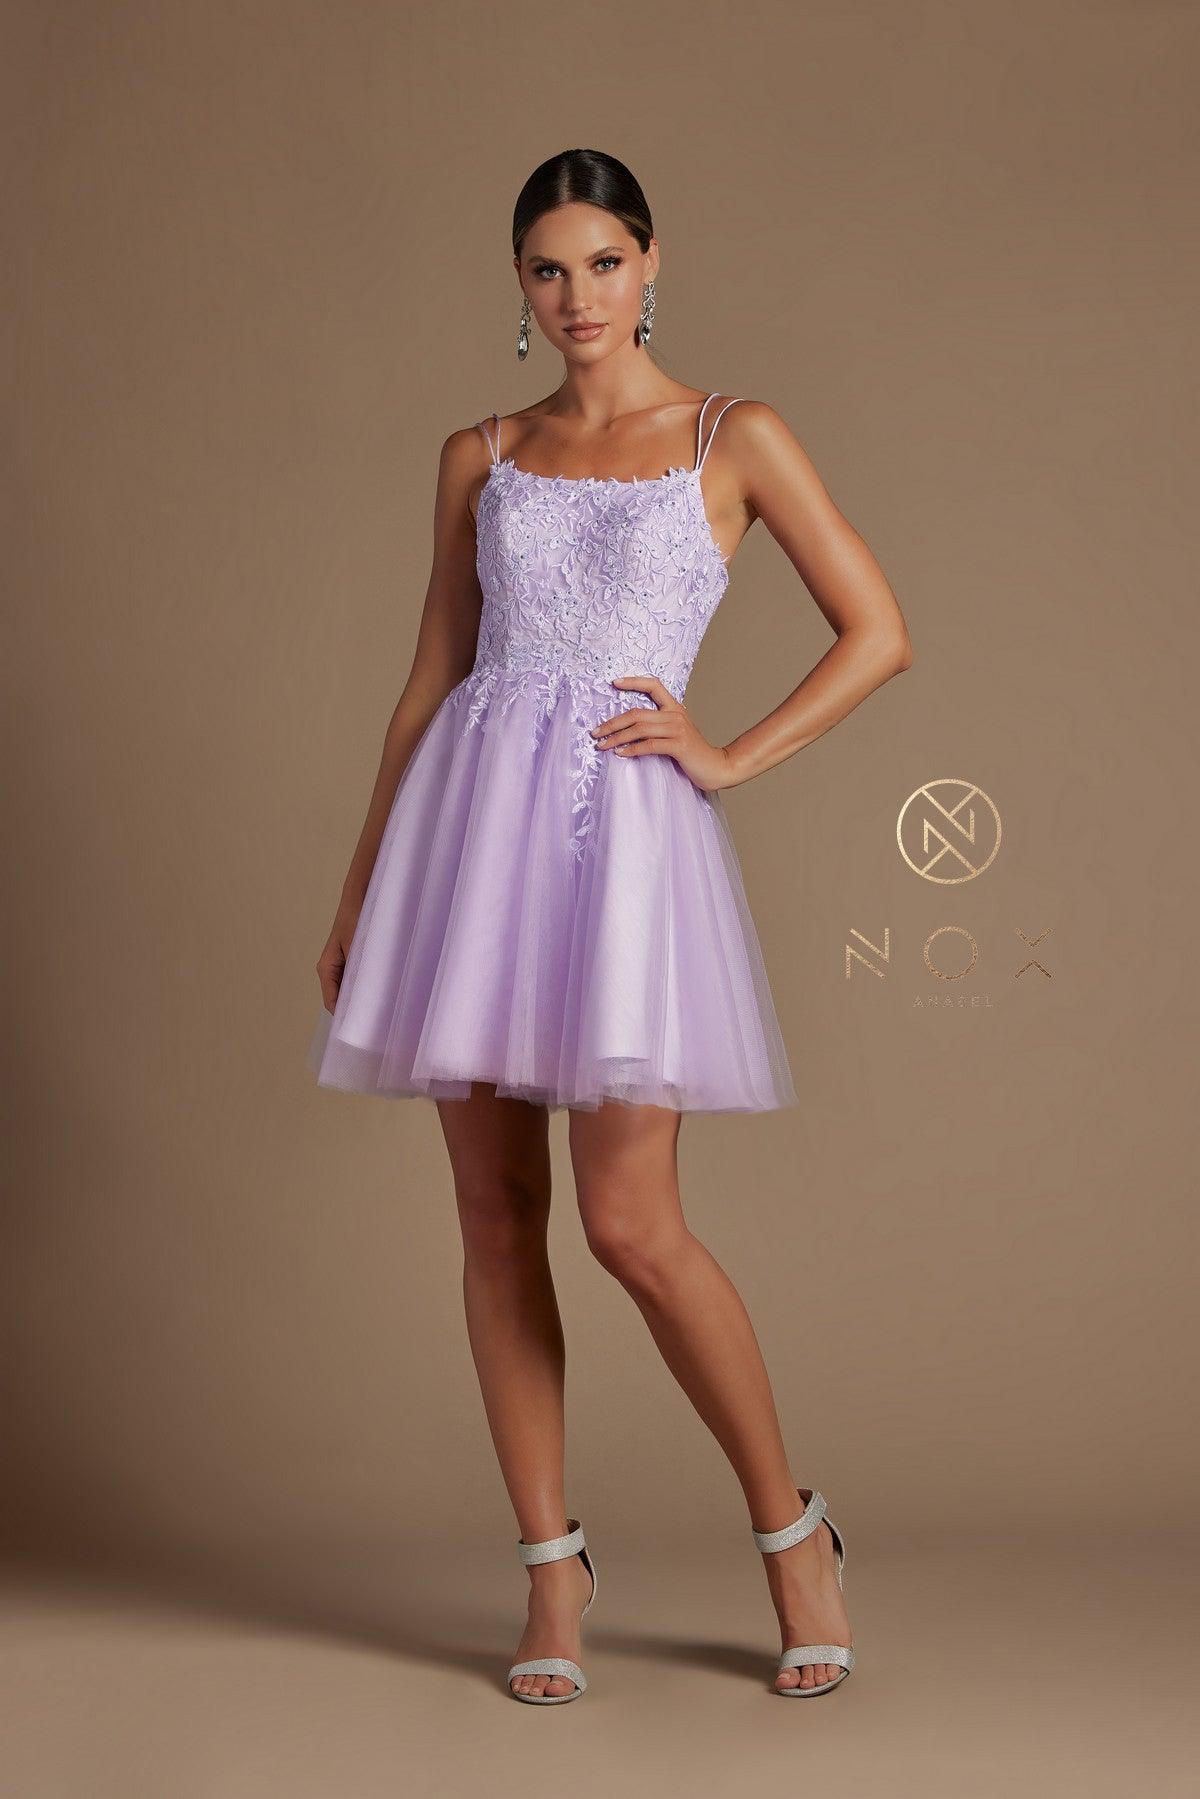 Short Spaghetti Strap Homecoming Dress Sale - The Dress Outlet